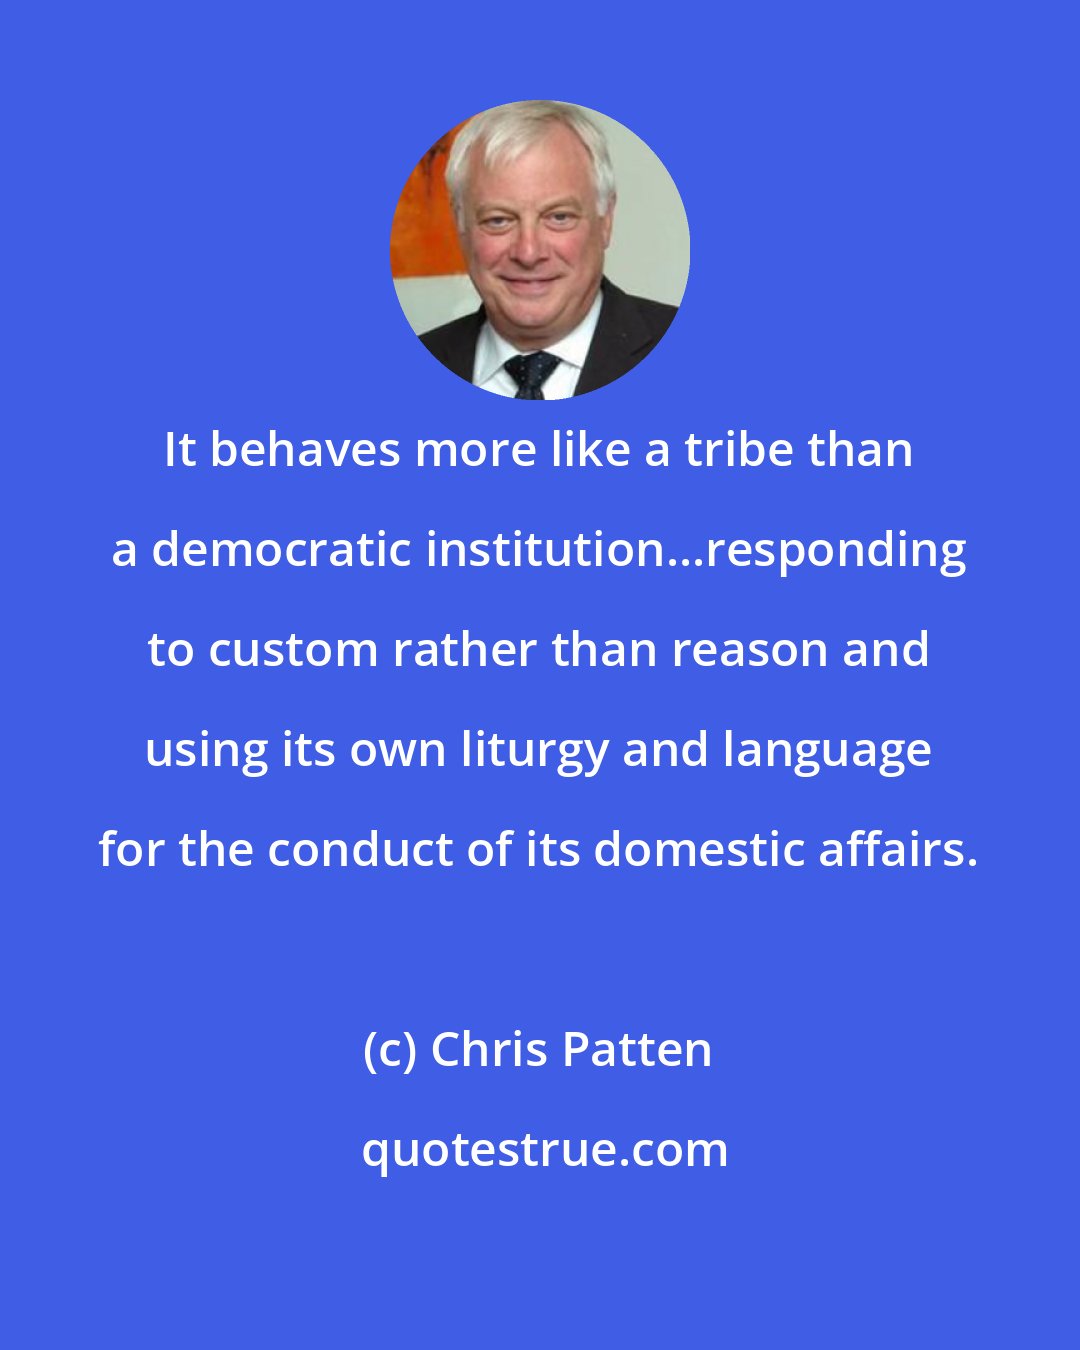 Chris Patten: It behaves more like a tribe than a democratic institution...responding to custom rather than reason and using its own liturgy and language for the conduct of its domestic affairs.